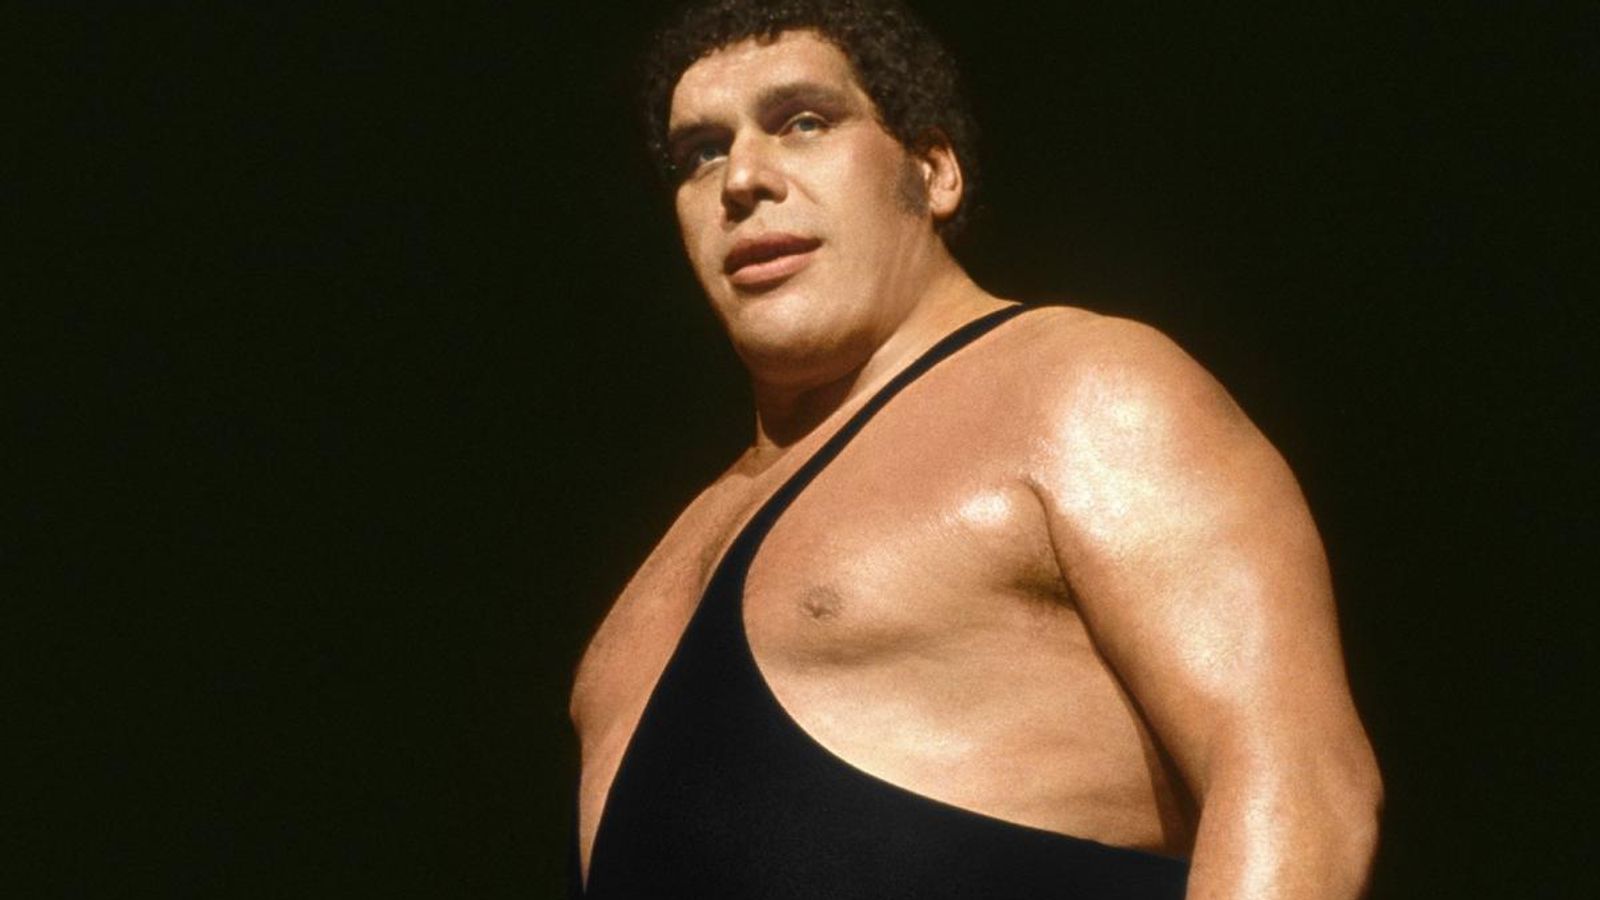 [Jeu] Suite d'images !  - Page 5 Skysports-andre-giant-wwe-wwf_5013890